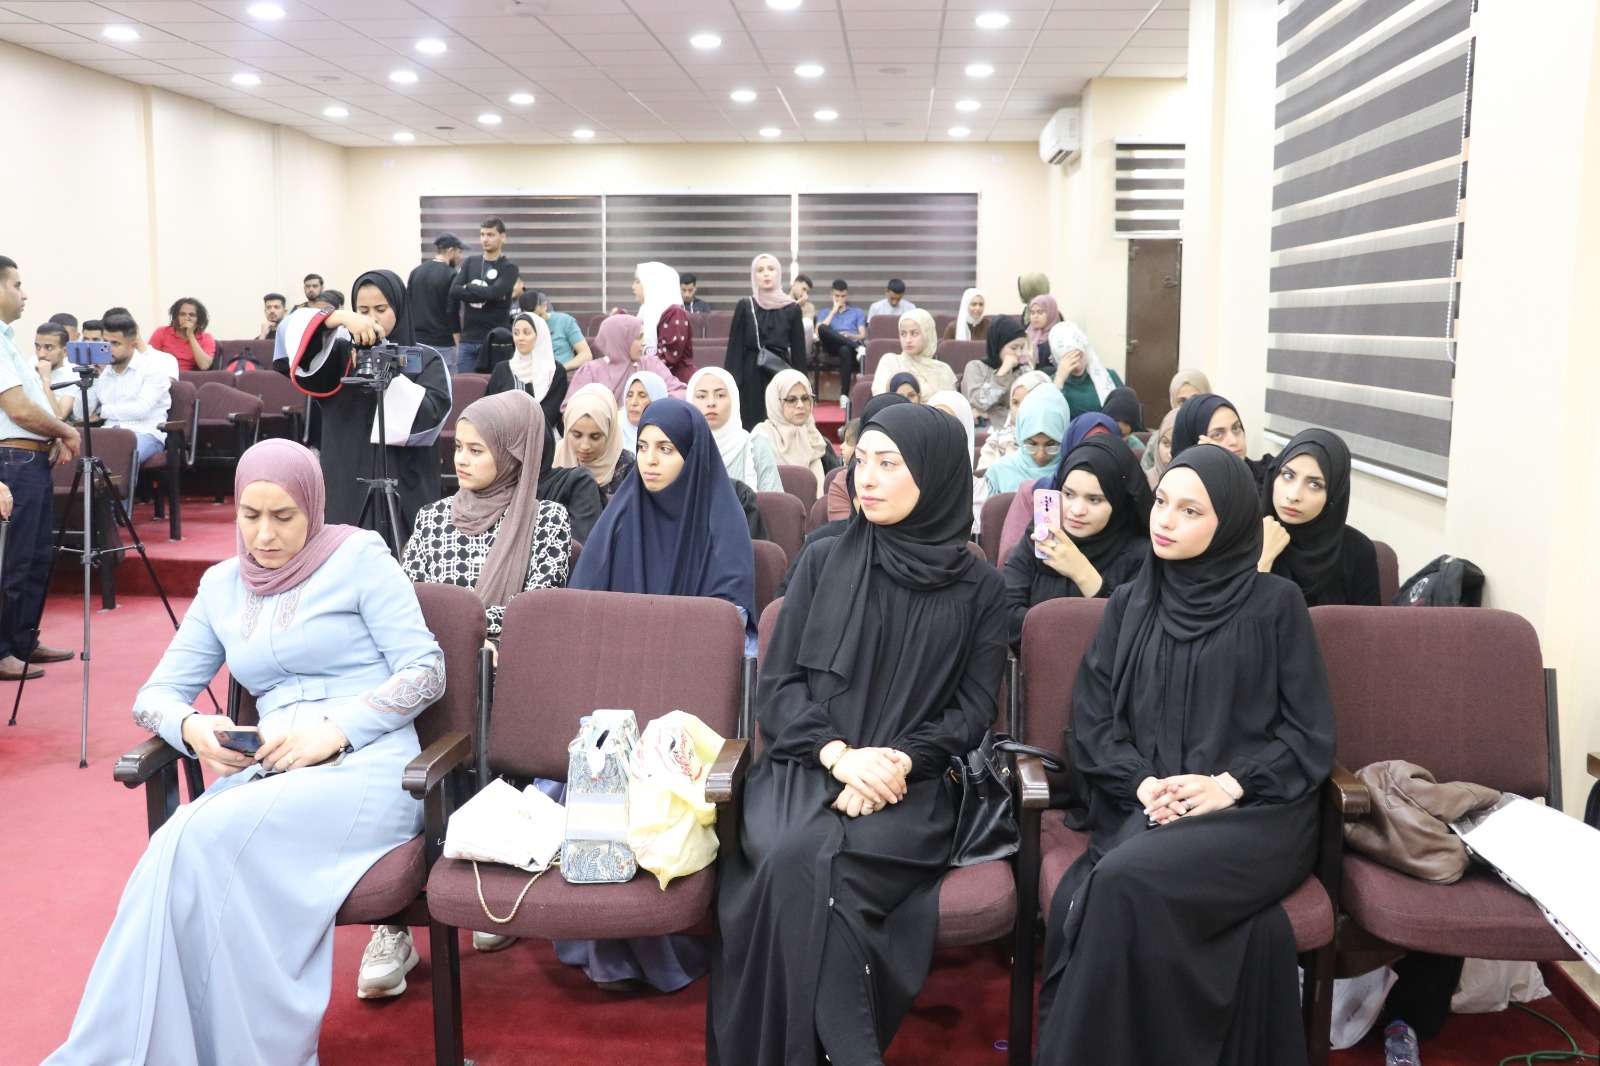 The attendees of the symposium organized by the Department of Information and Applied Arts